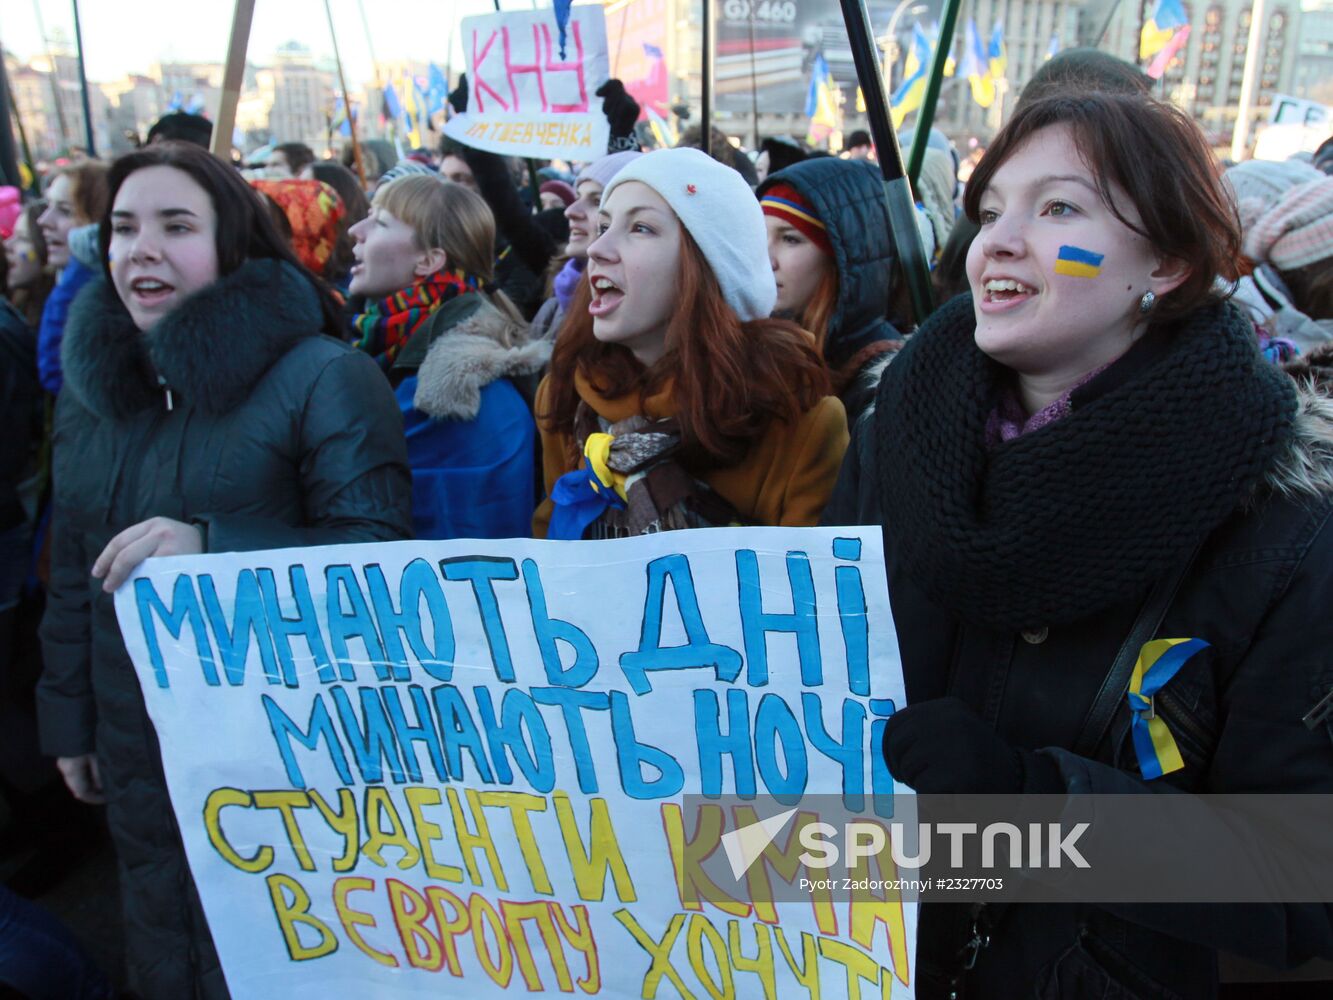 Rally in Ukraine in support of EU integration